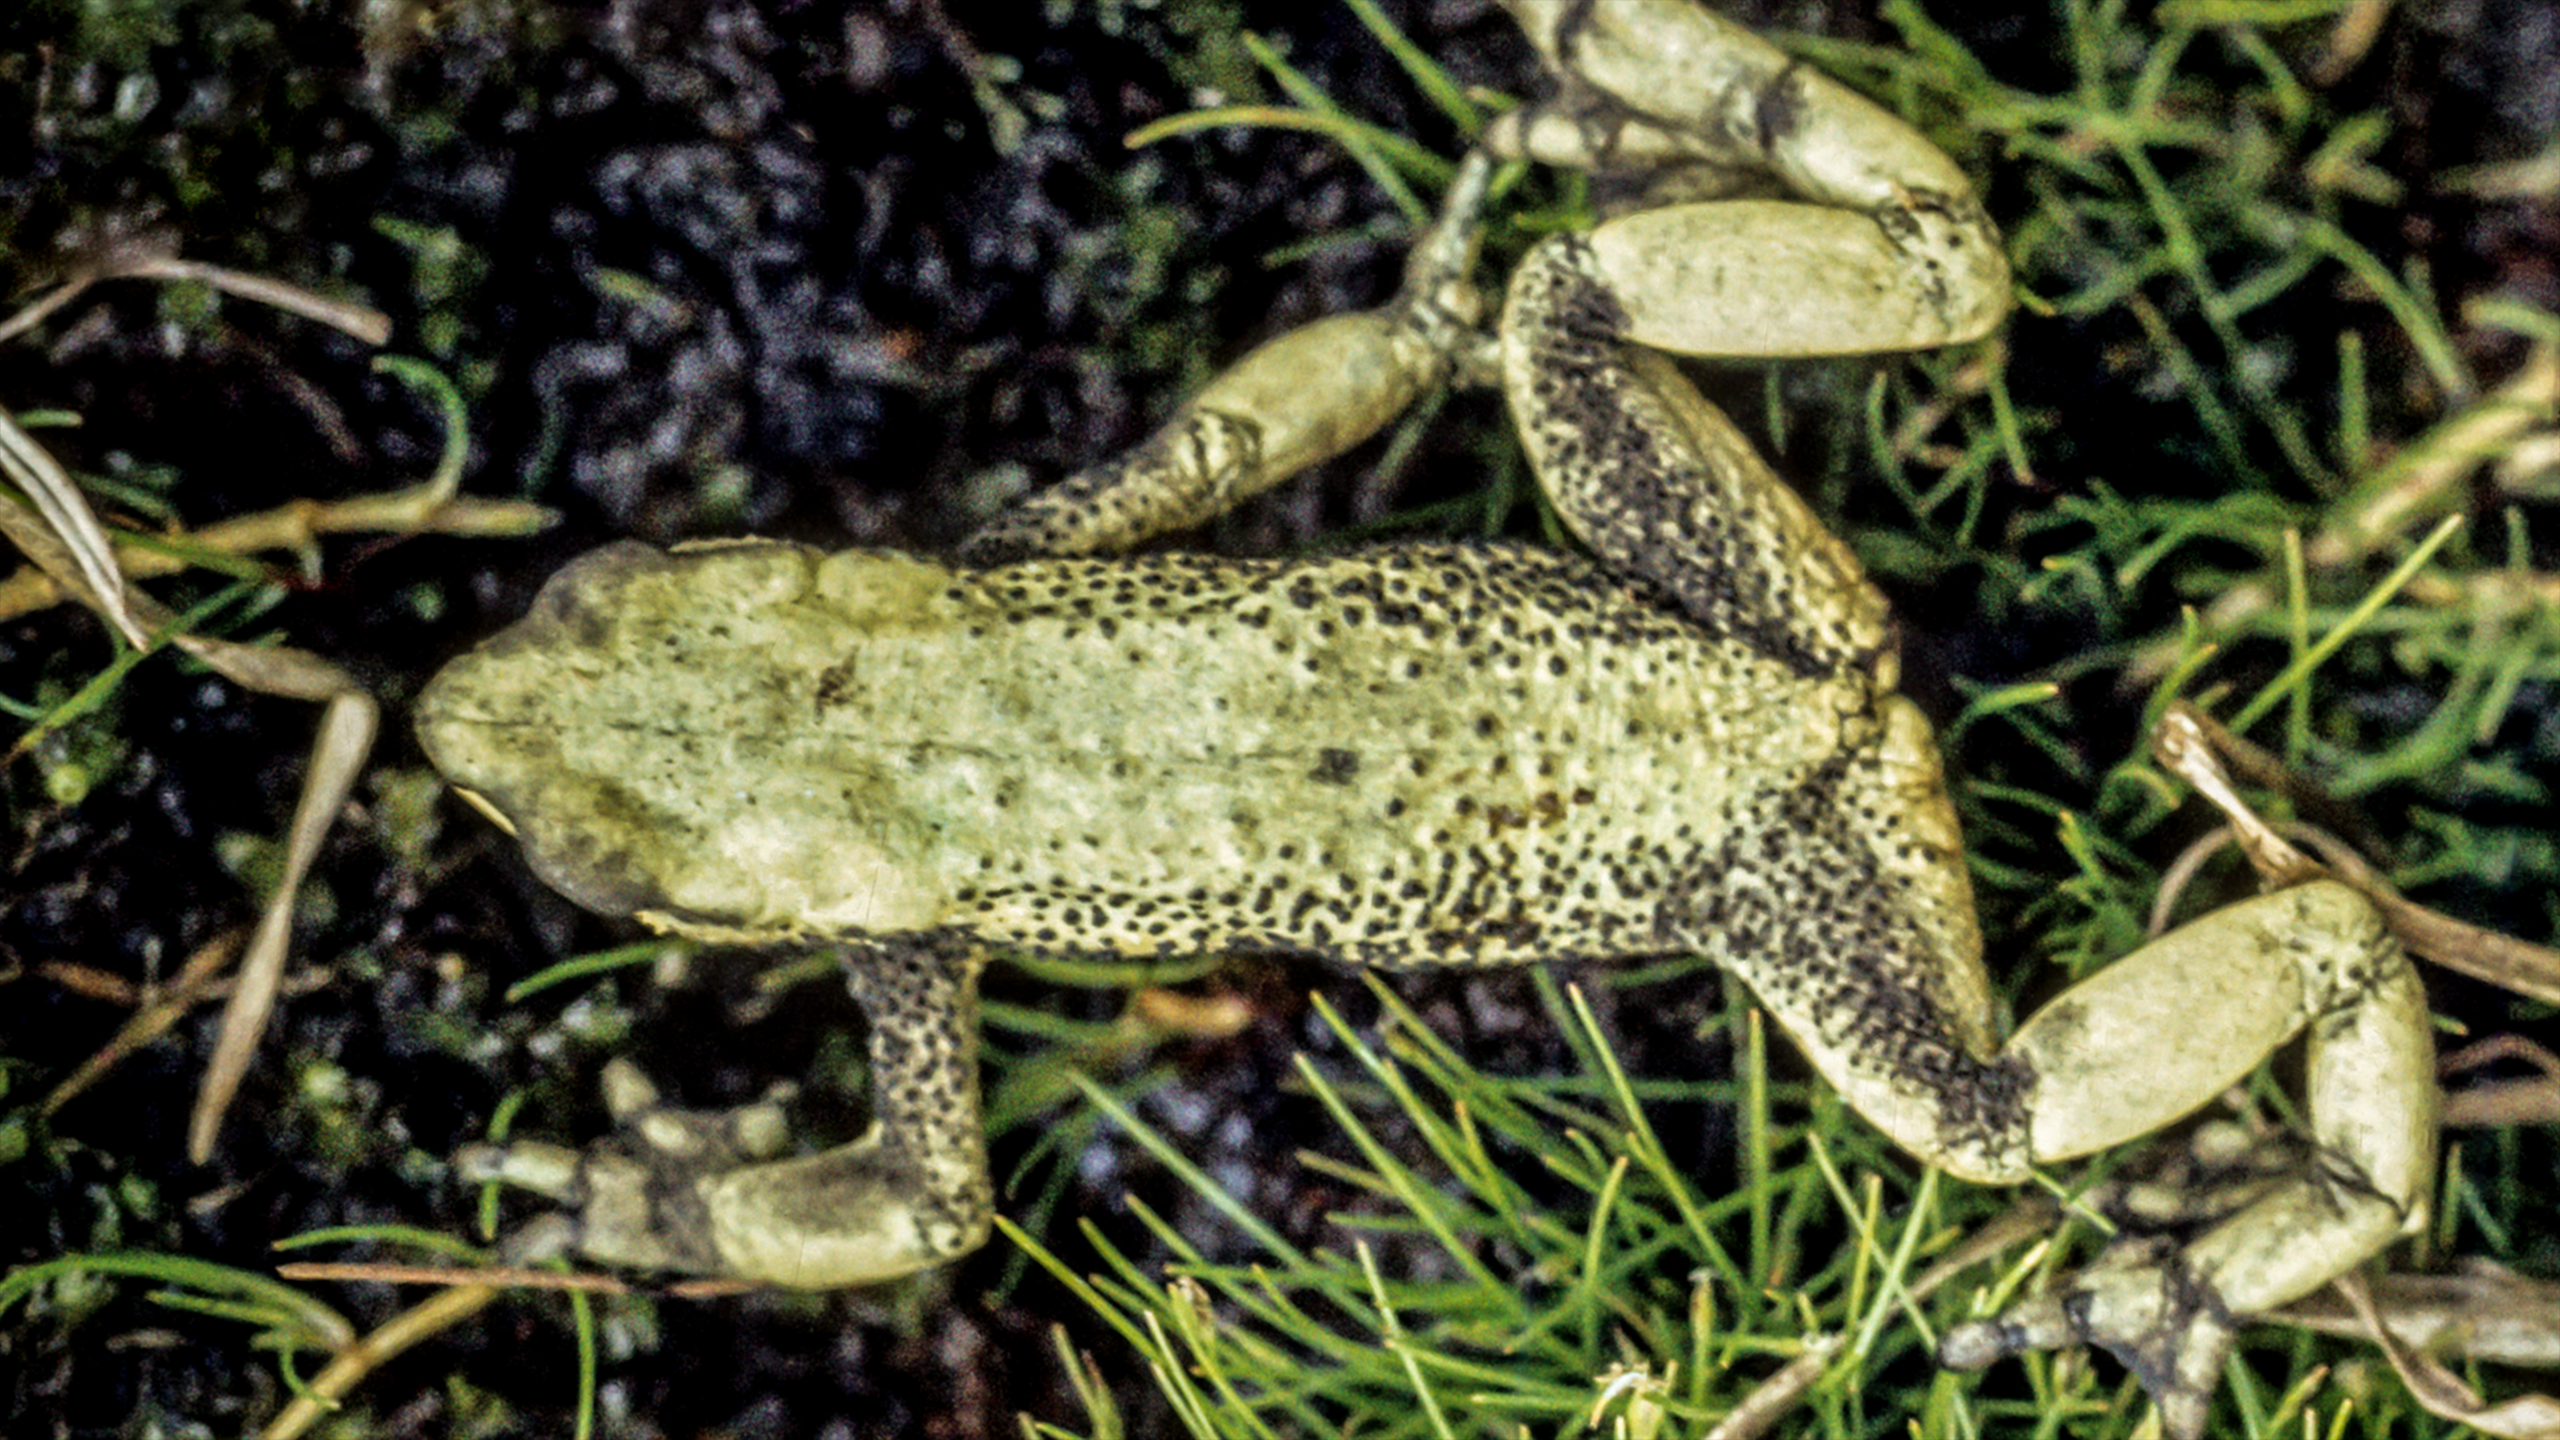 Disappeared without a trace since 1992: Atelopus pastuso from the highlands of Ecuador and Colombia | Luis Coloma, Centro Jambatu